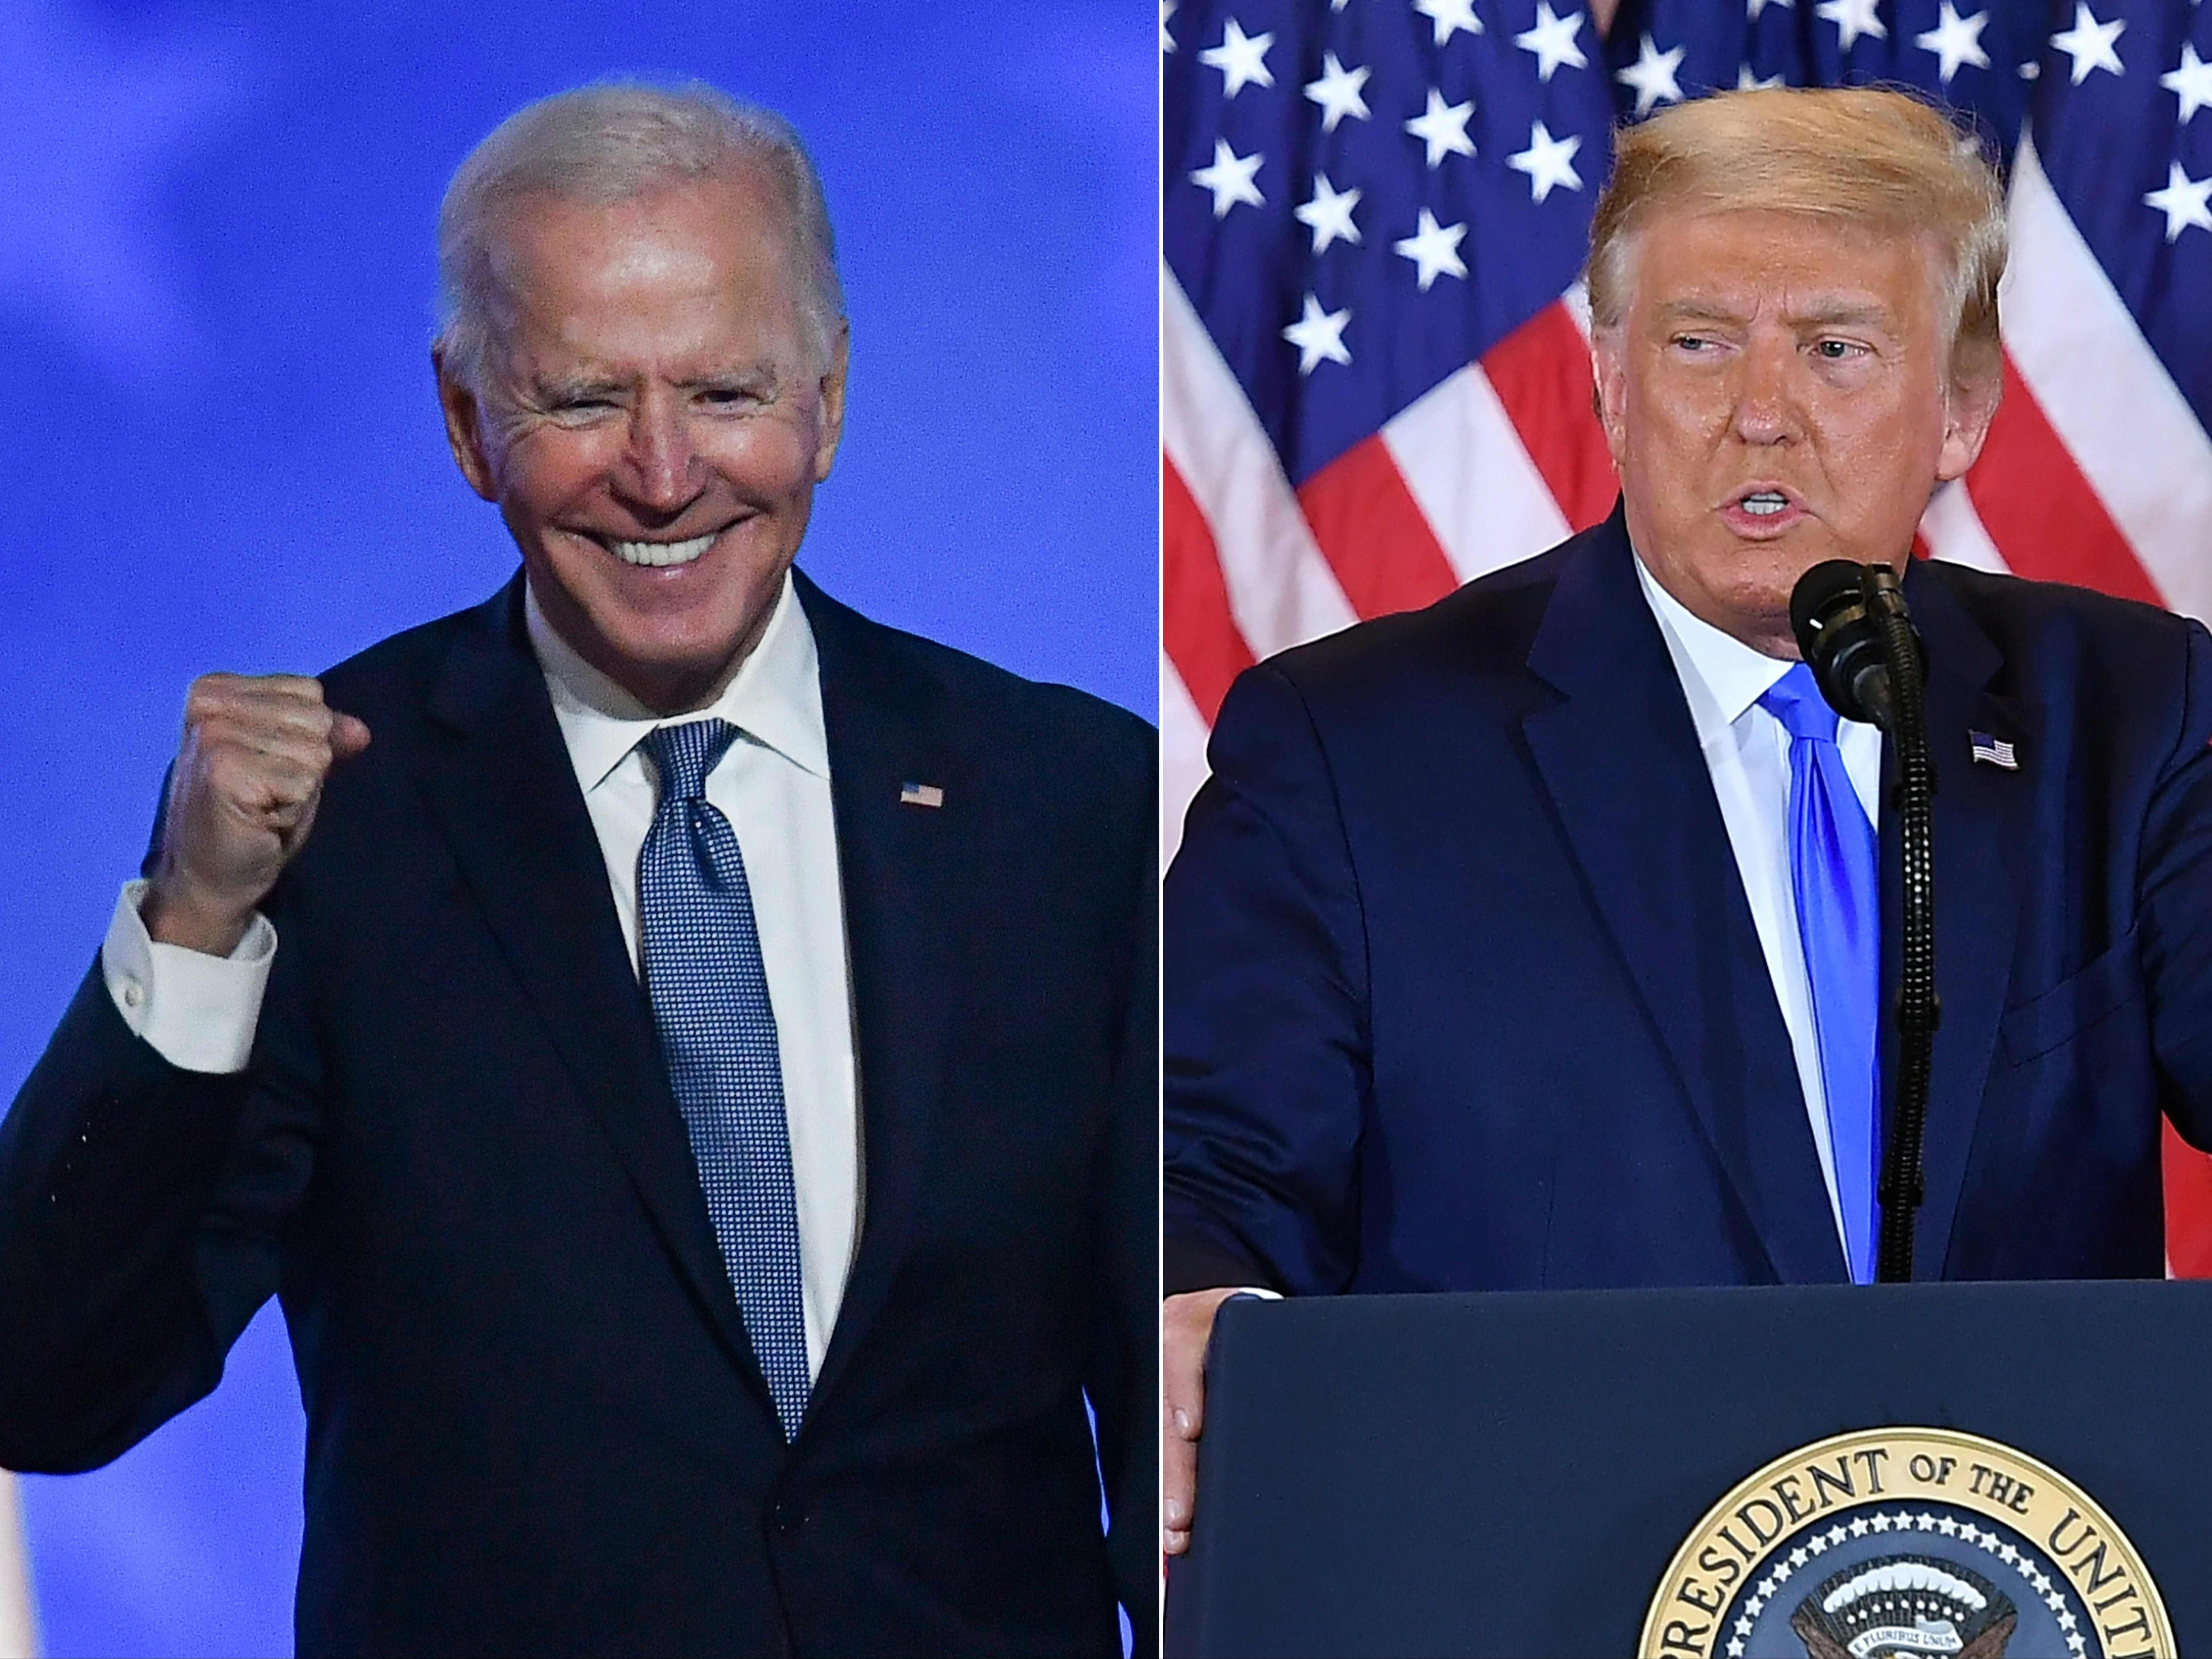 Joe Biden and Donald Trump are in a tight battle to win the 2020 US presidential election